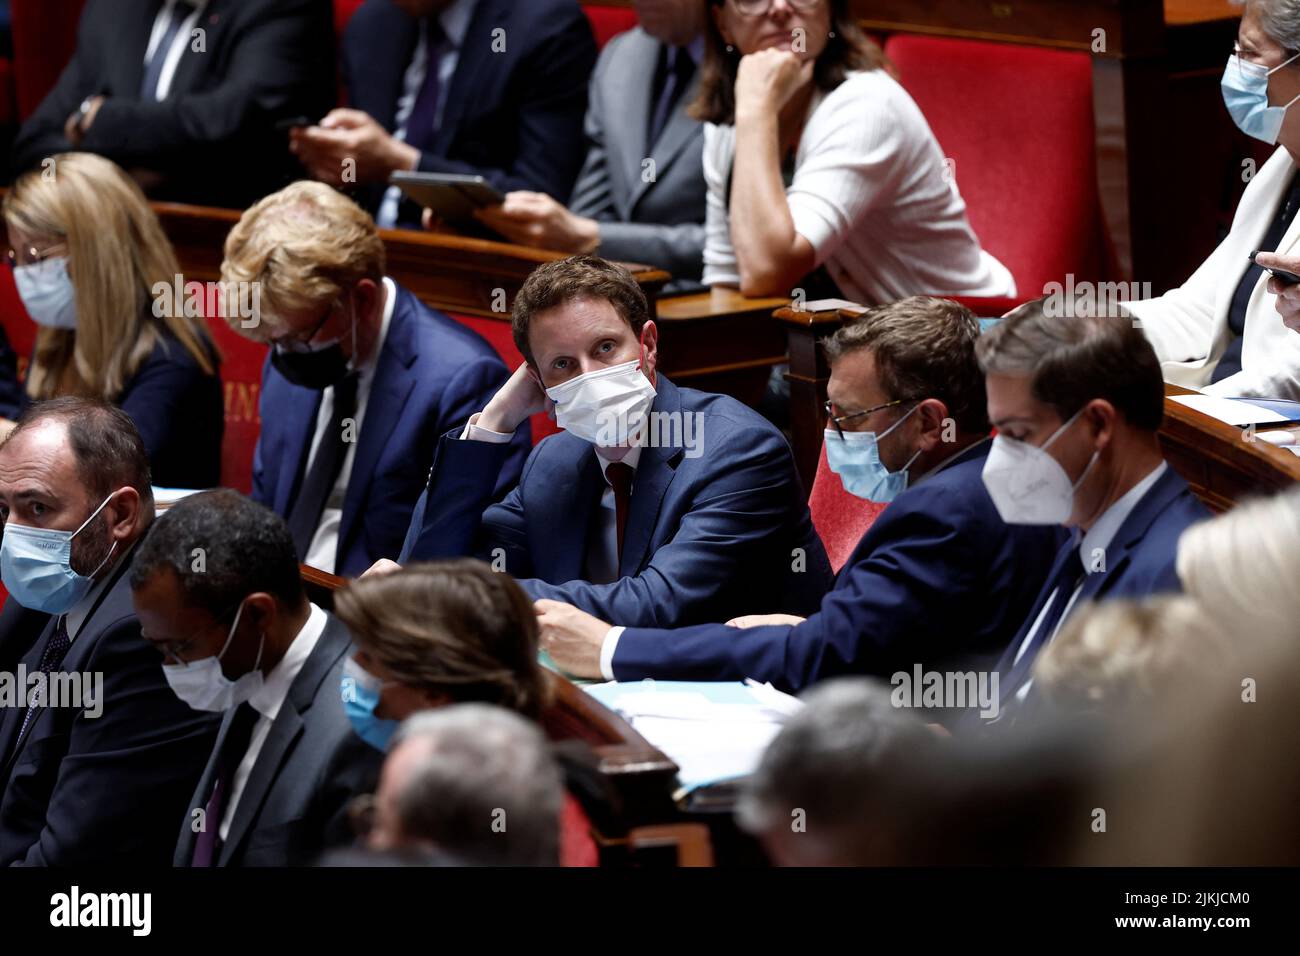 French Junior Minister for Transports Clement Beaune attends the questions to the government session at the National Assembly in Paris, France, August 2, 2022. REUTERS/Benoit Tessier Stock Photo